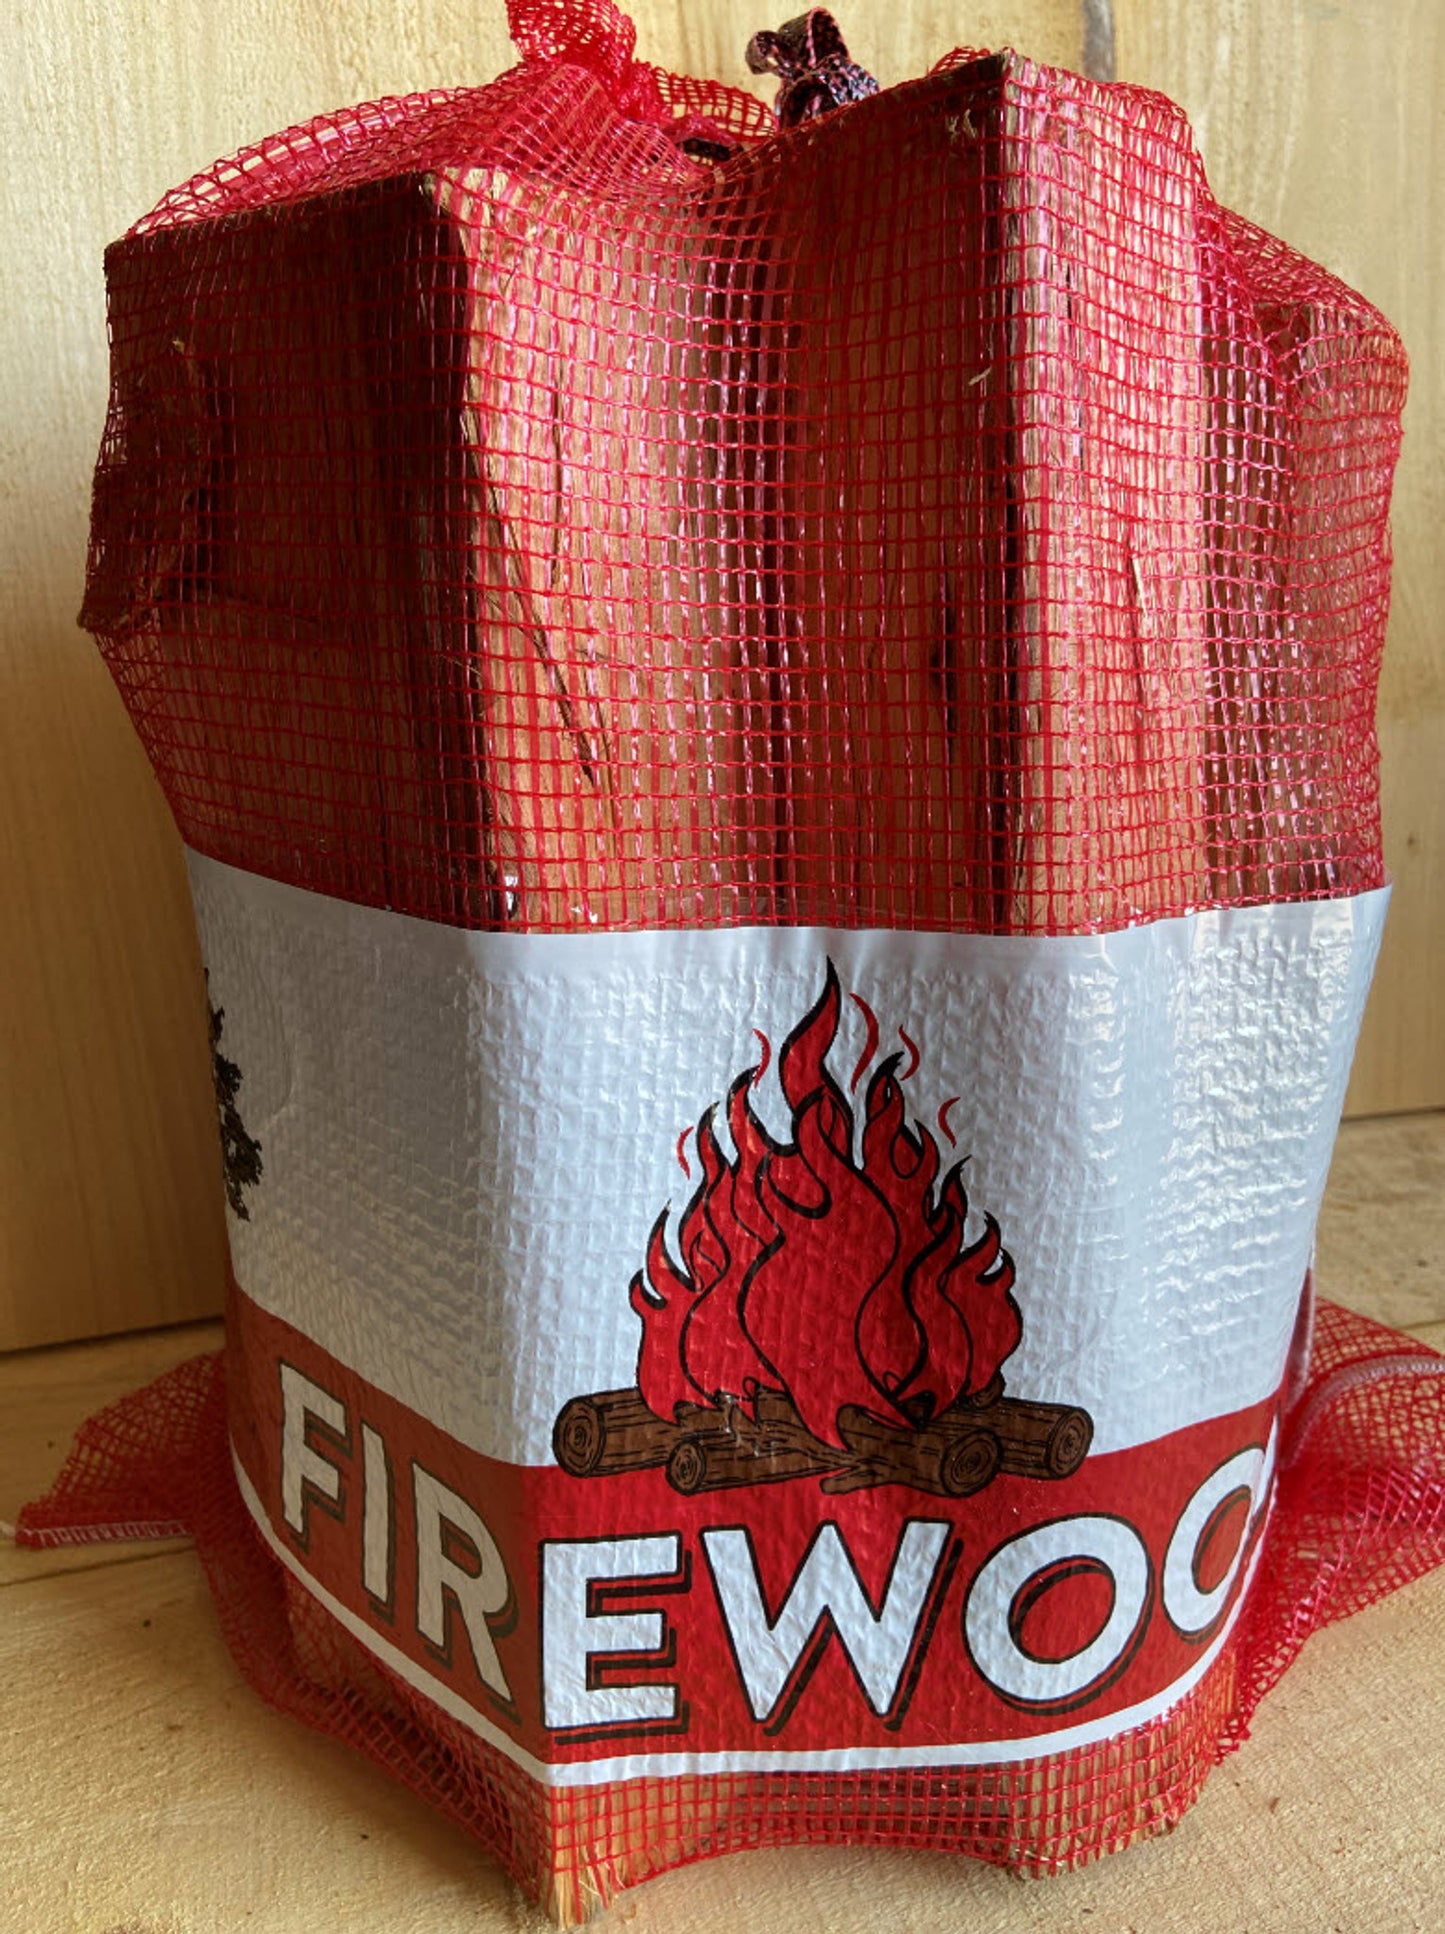 Bagged Firewood - 1 Cubic Foot